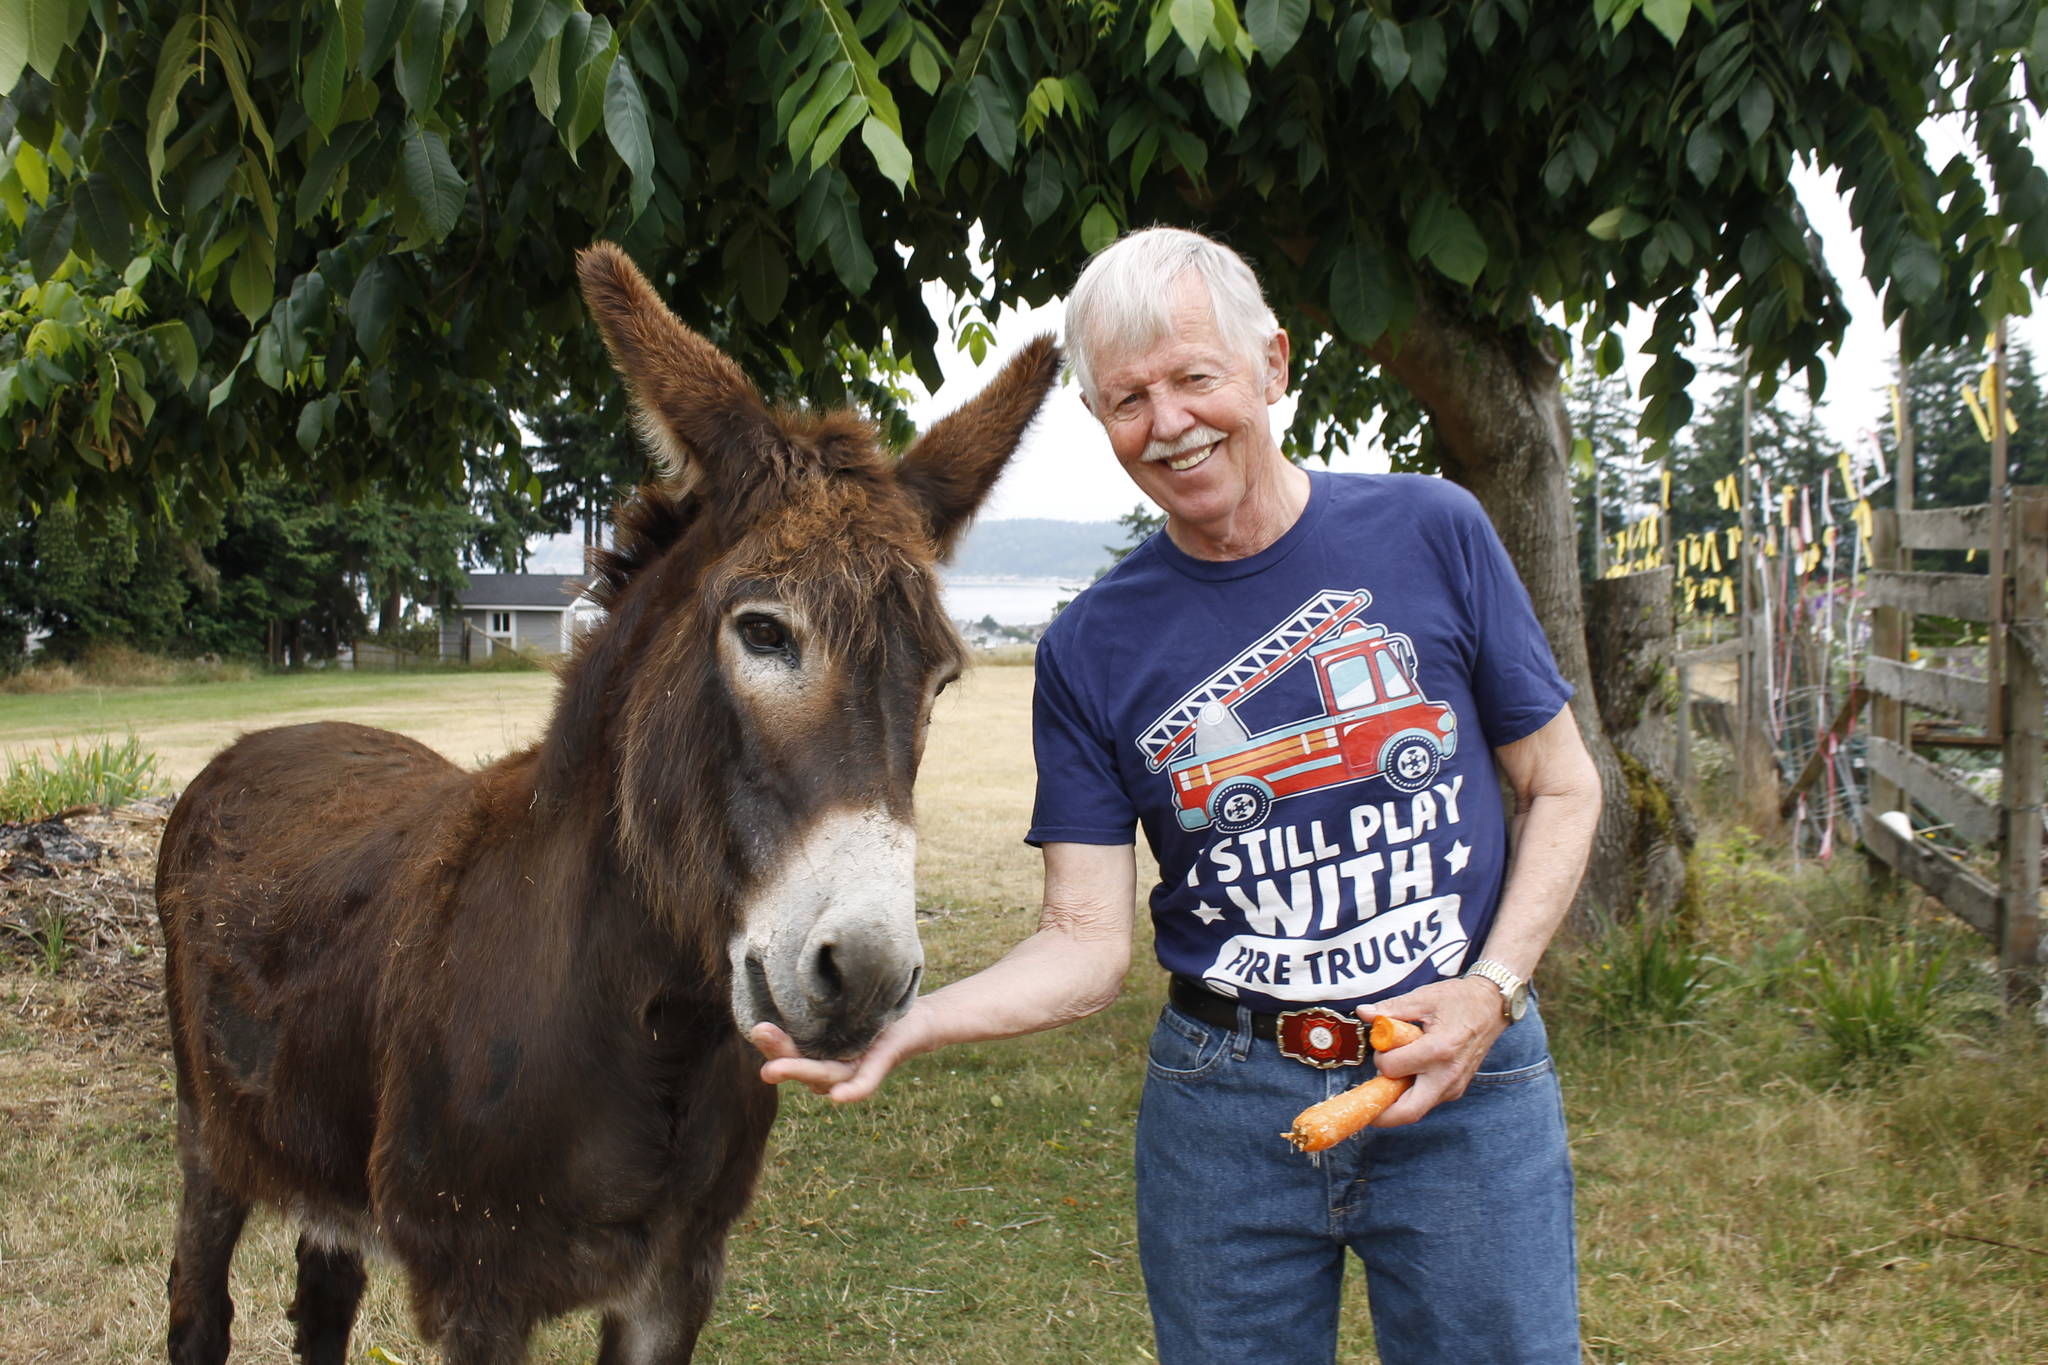 Gary Gabelein, this year’s grand marshal of the Whidbey Island Fair parade, with his donkey, Cleopatra. (Photo by Kira Erickson/Whidbey News-Times)